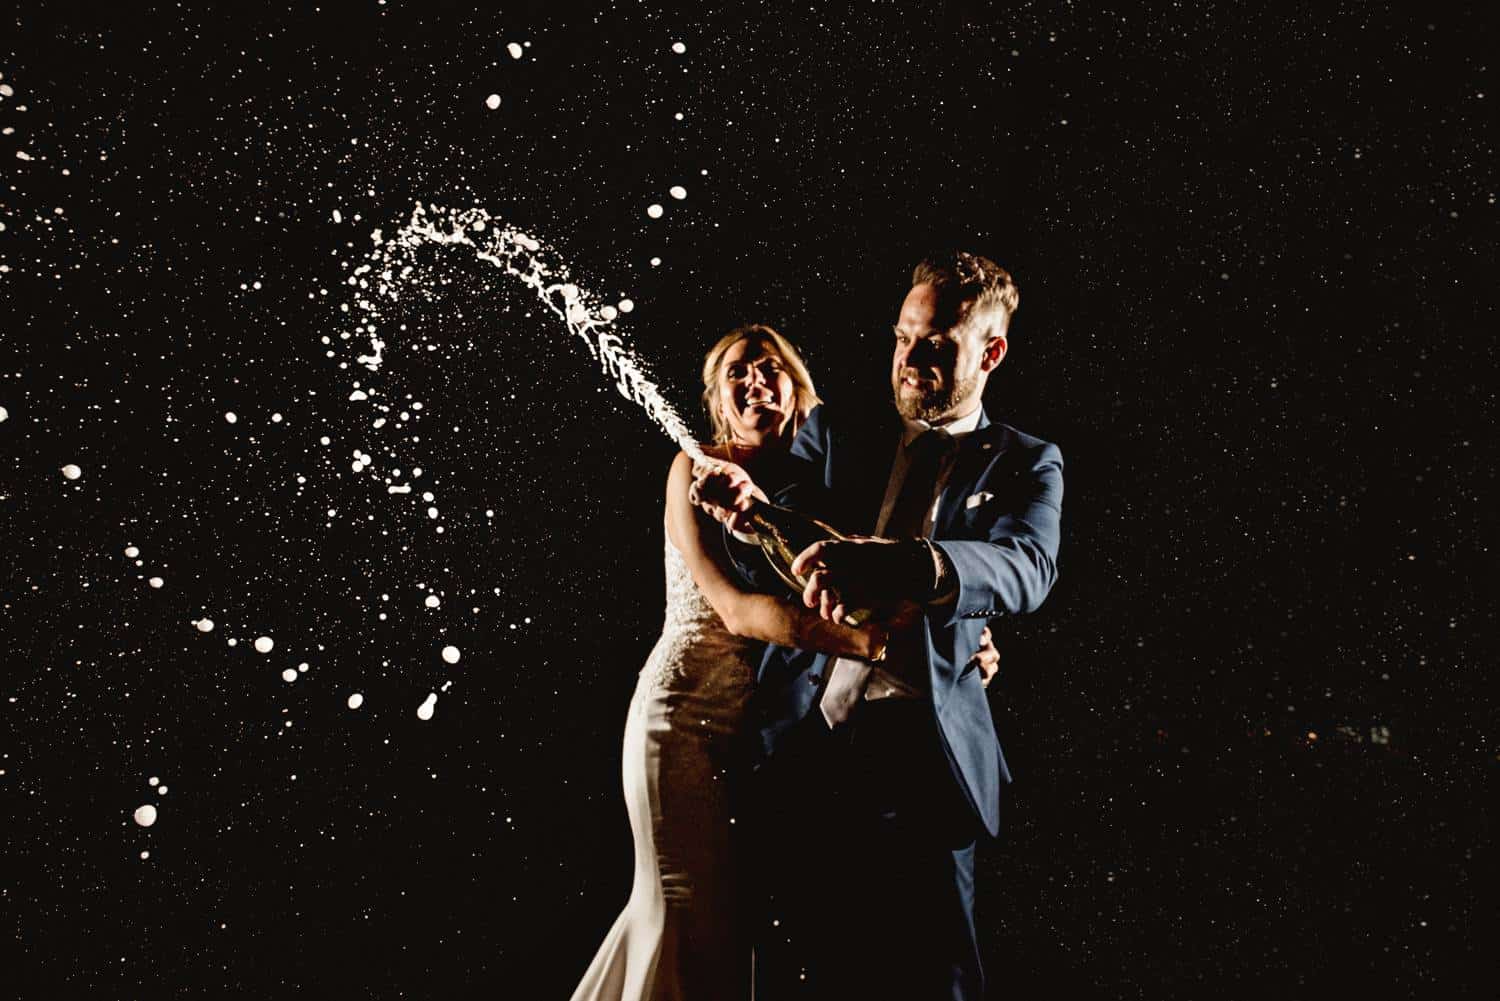 A wedding couple stands against a nighttime backdrop and pops a fresh bottle of champagne. The bride's face is jubilant and her arms encircle the groom as he pops the bottle's cork with determination on his face. Black & Gold Photography makes amazing wedding portraits using off-camera flash.